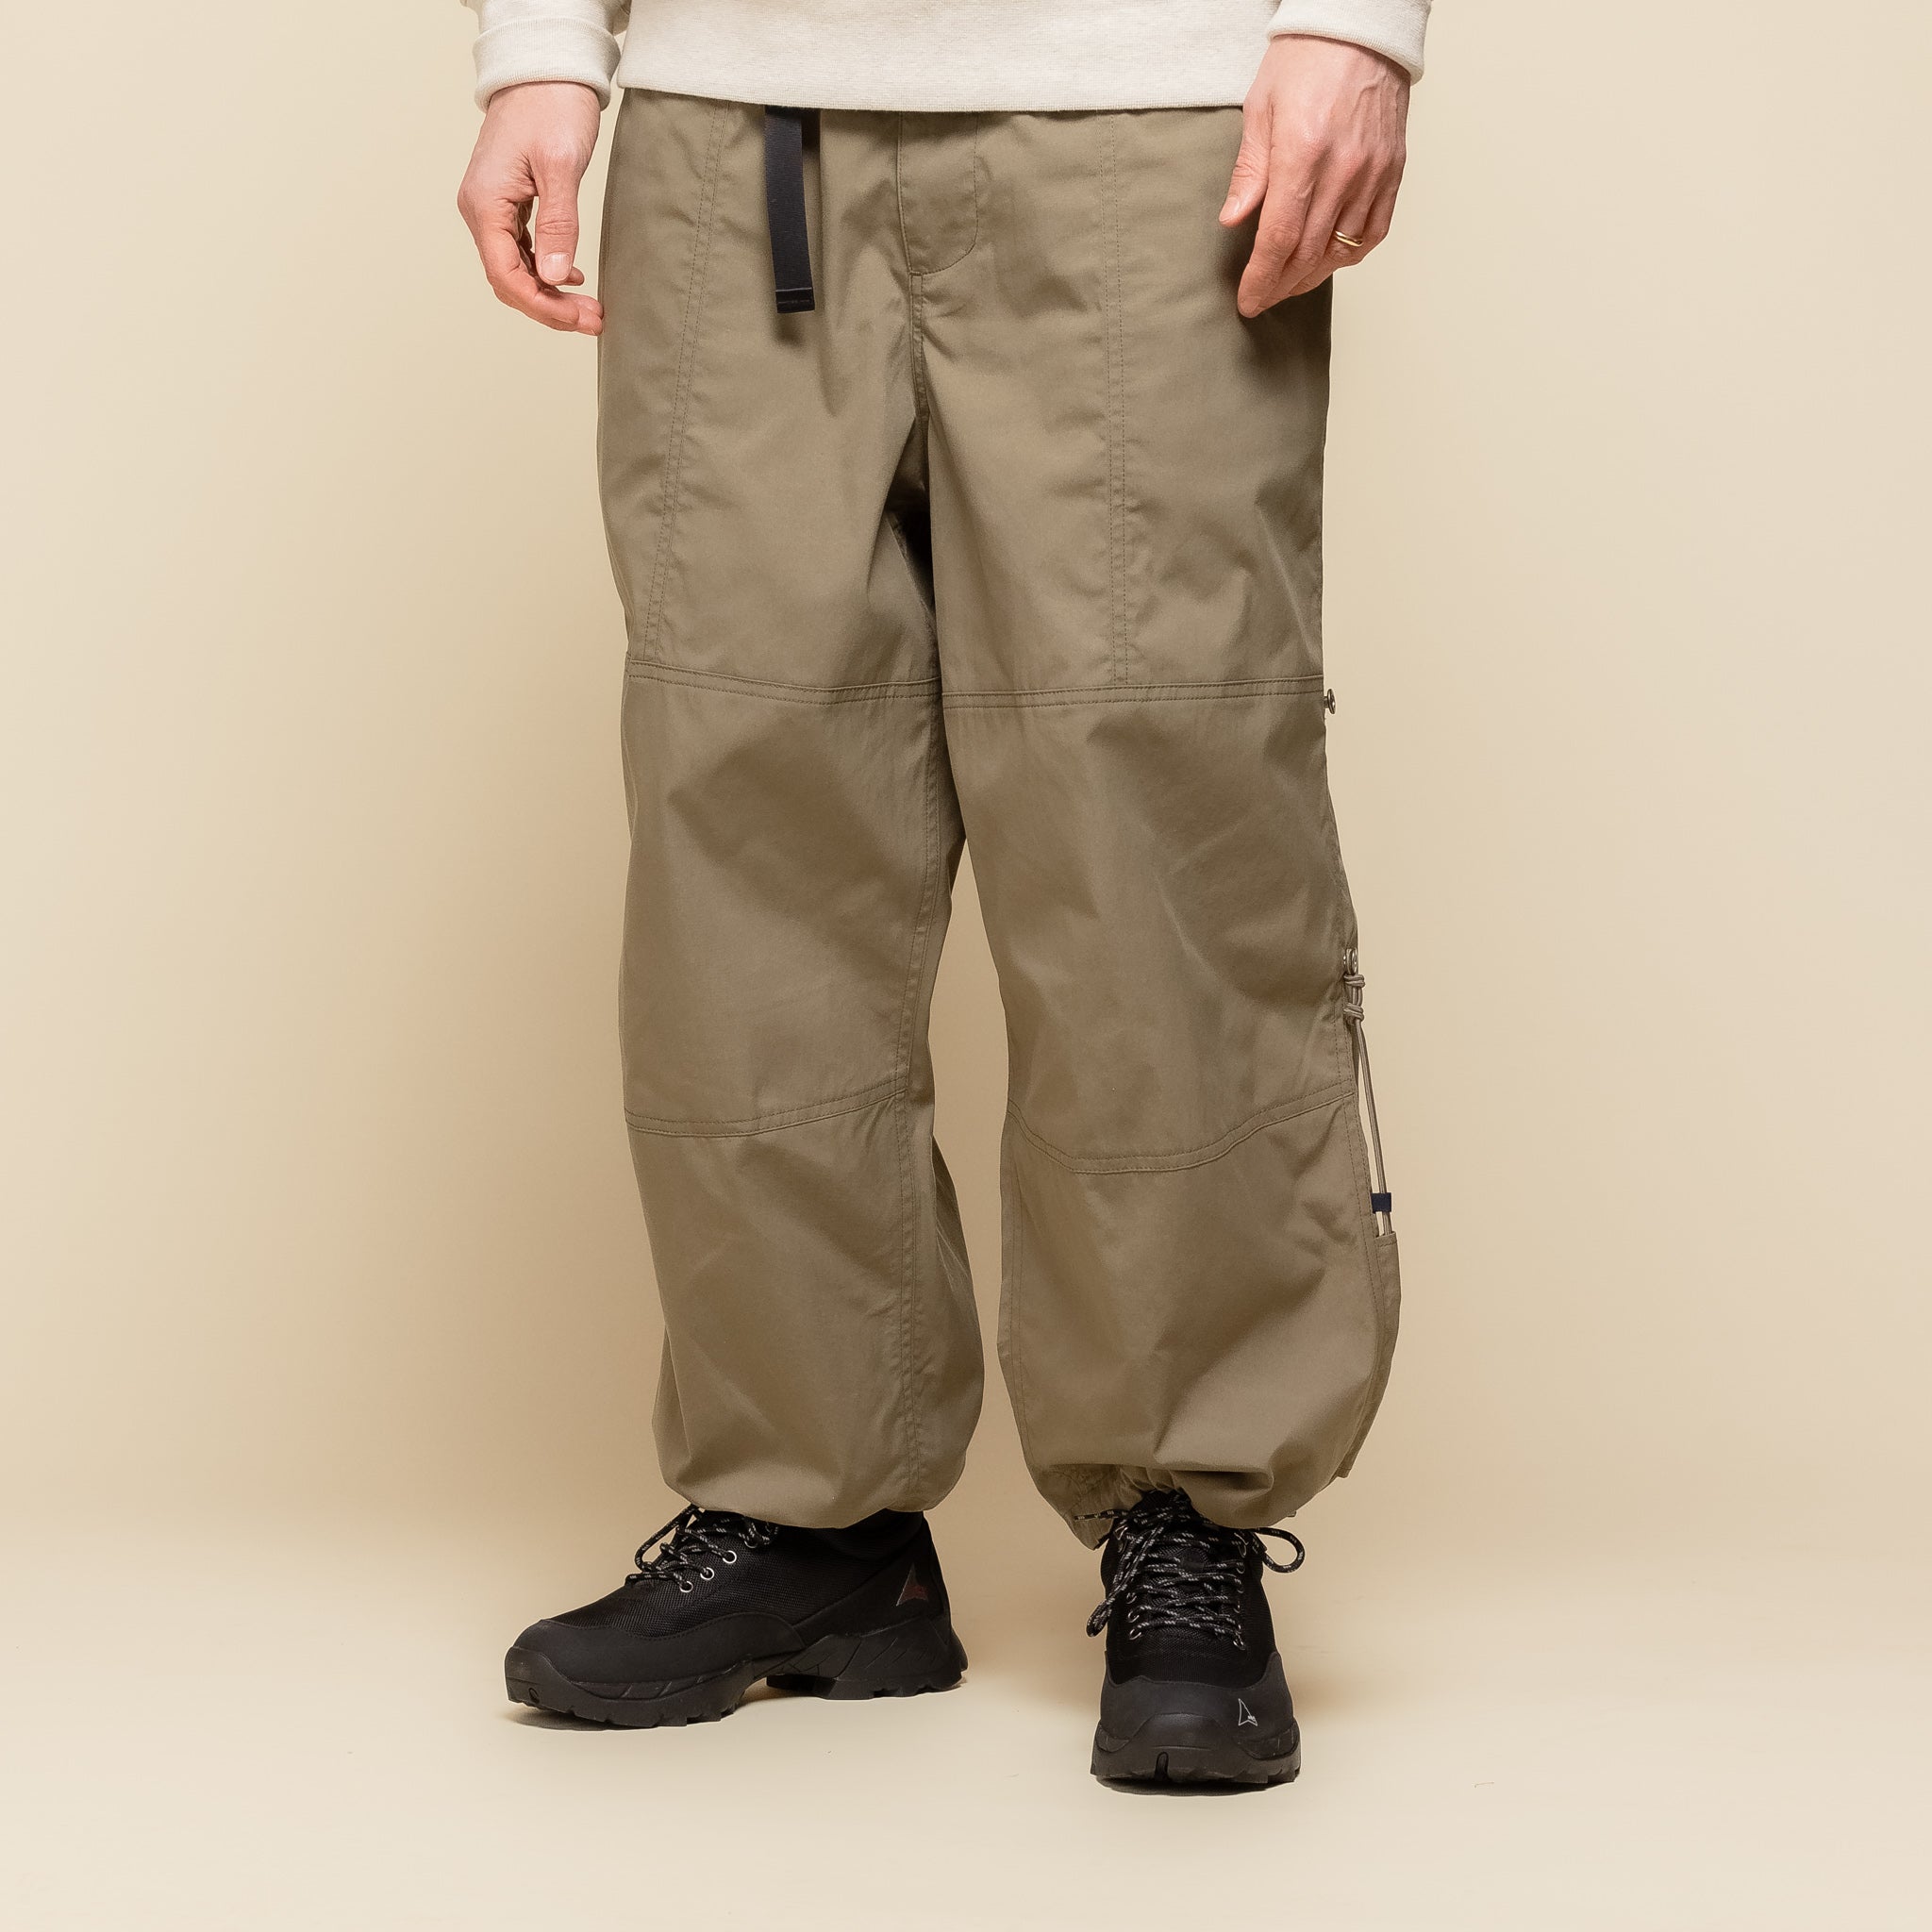 Poliquant - Changing Length Wide Pants - Grey Khaki "poliquant stockists" "poliquant pants" "poliquant website"